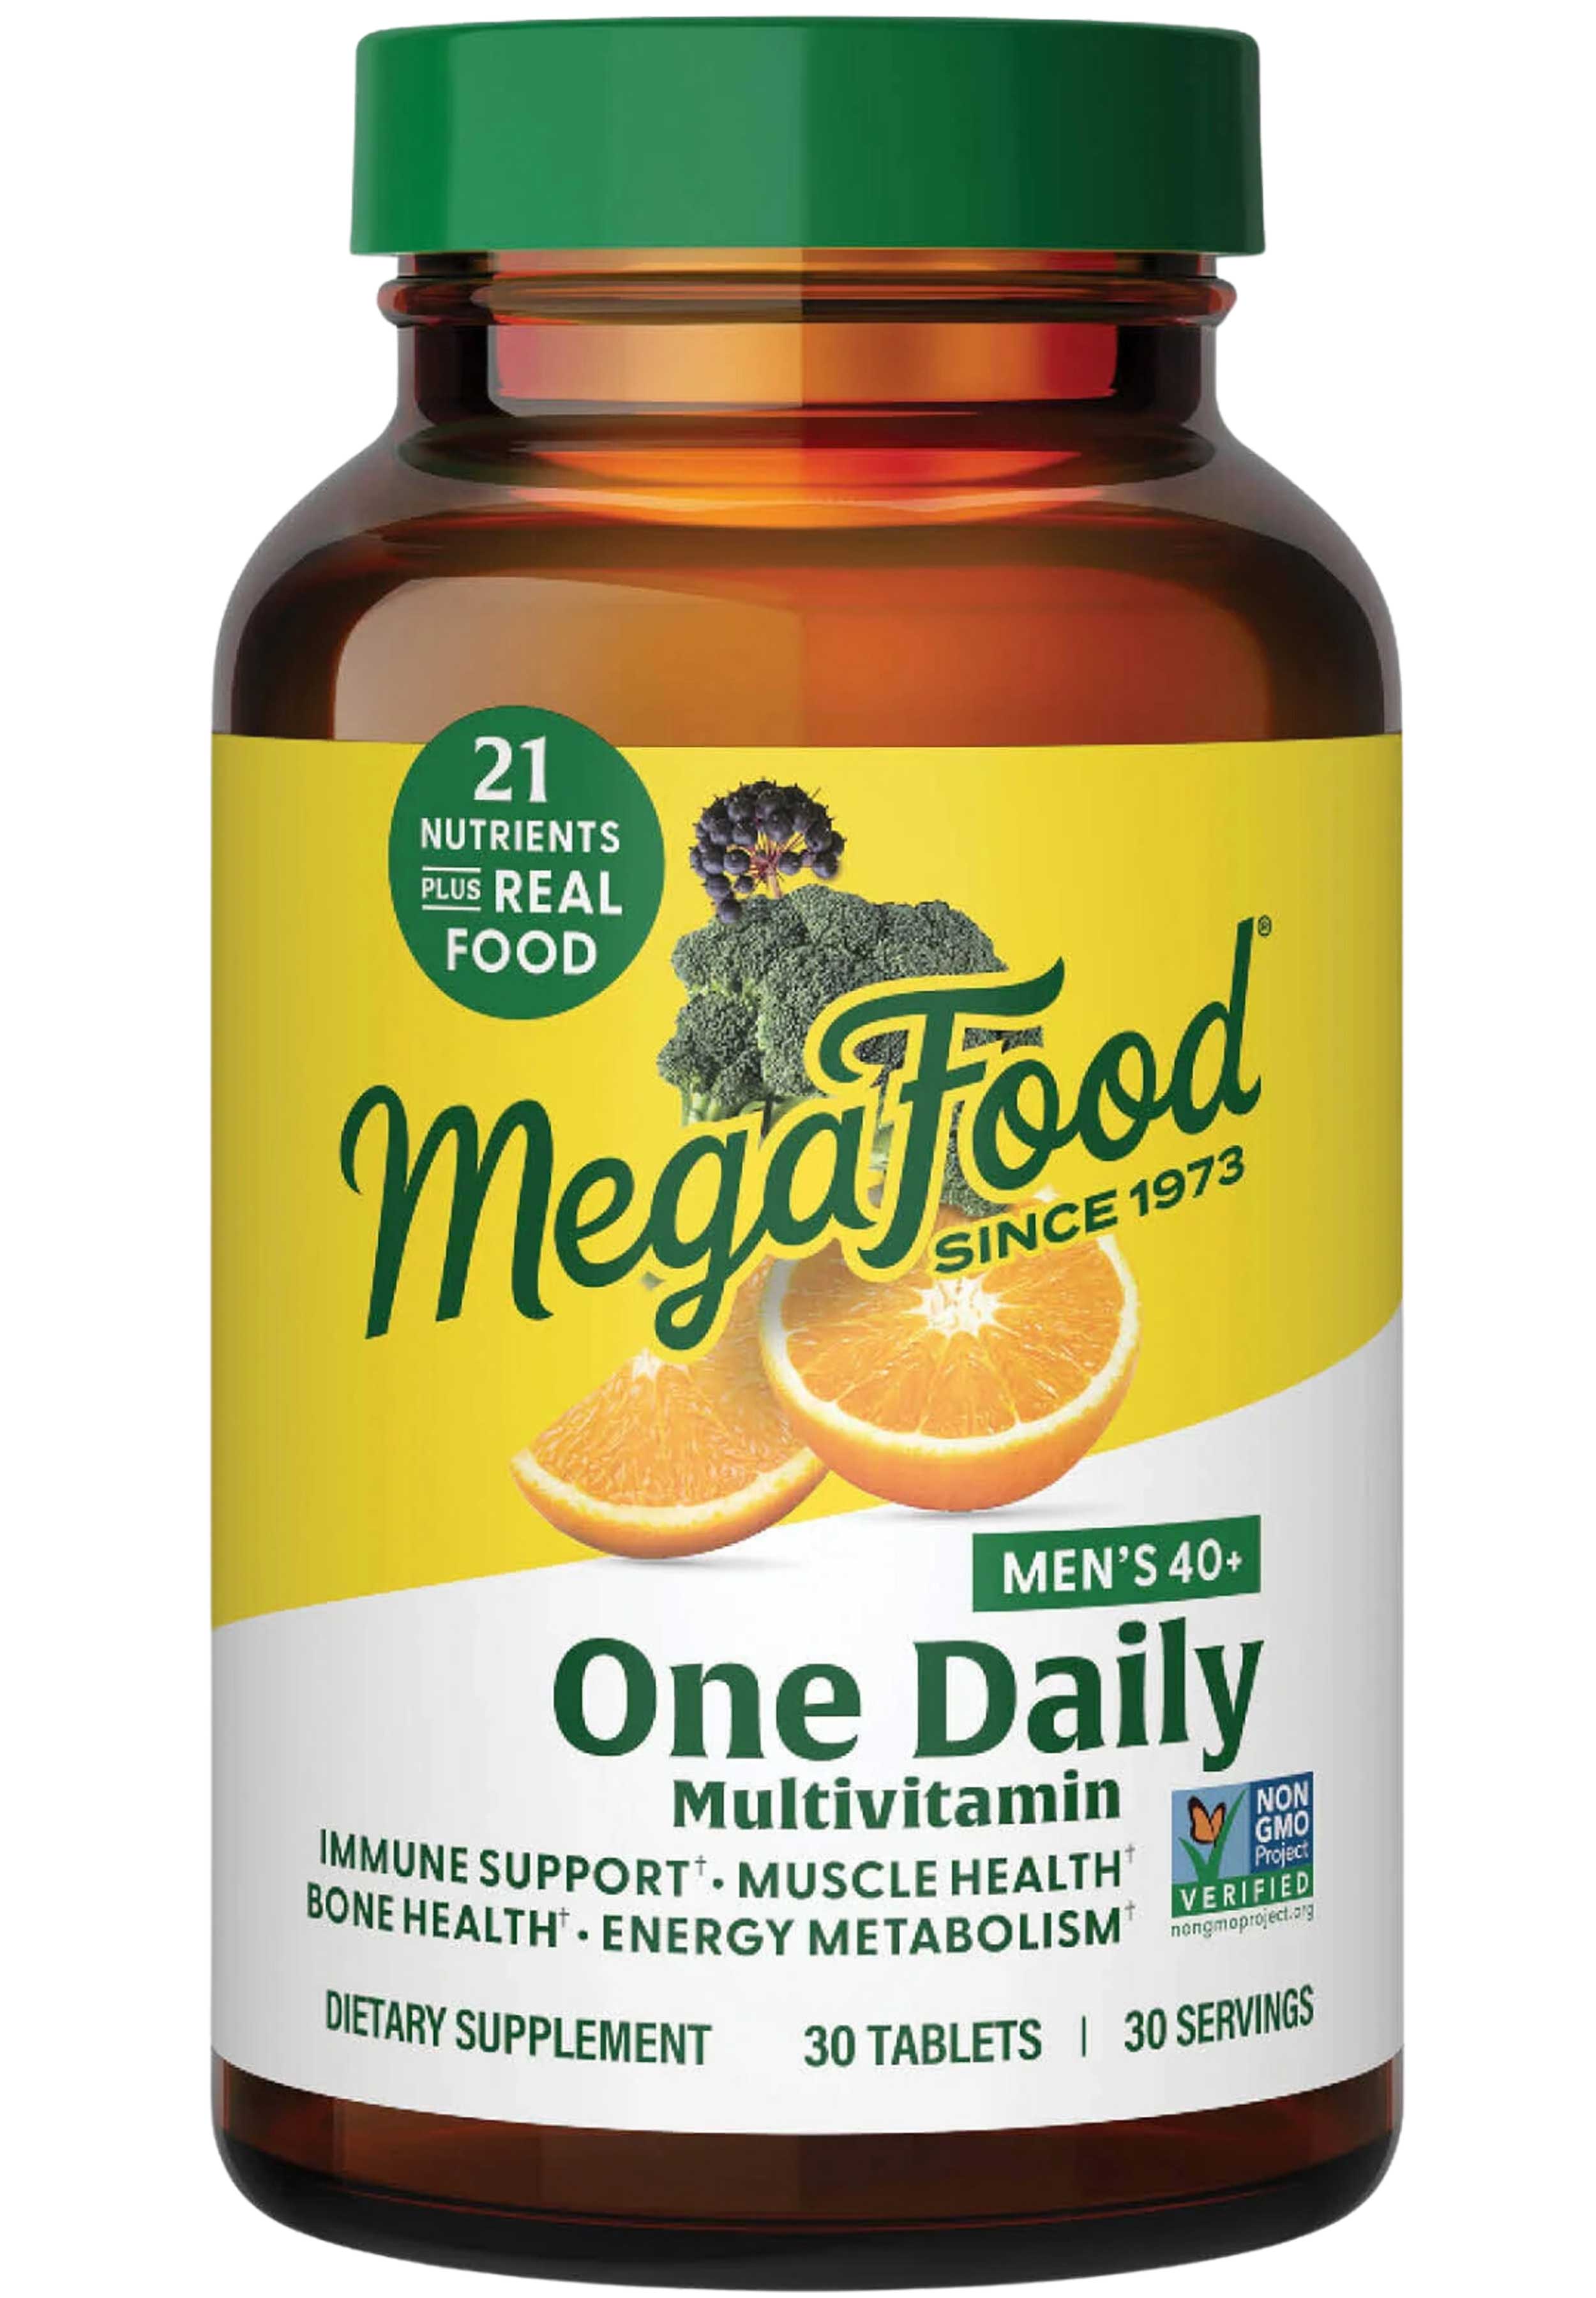 MegaFood Men's 40+ One Daily Multivitamin (Formerly Men Over 40 One Daily)